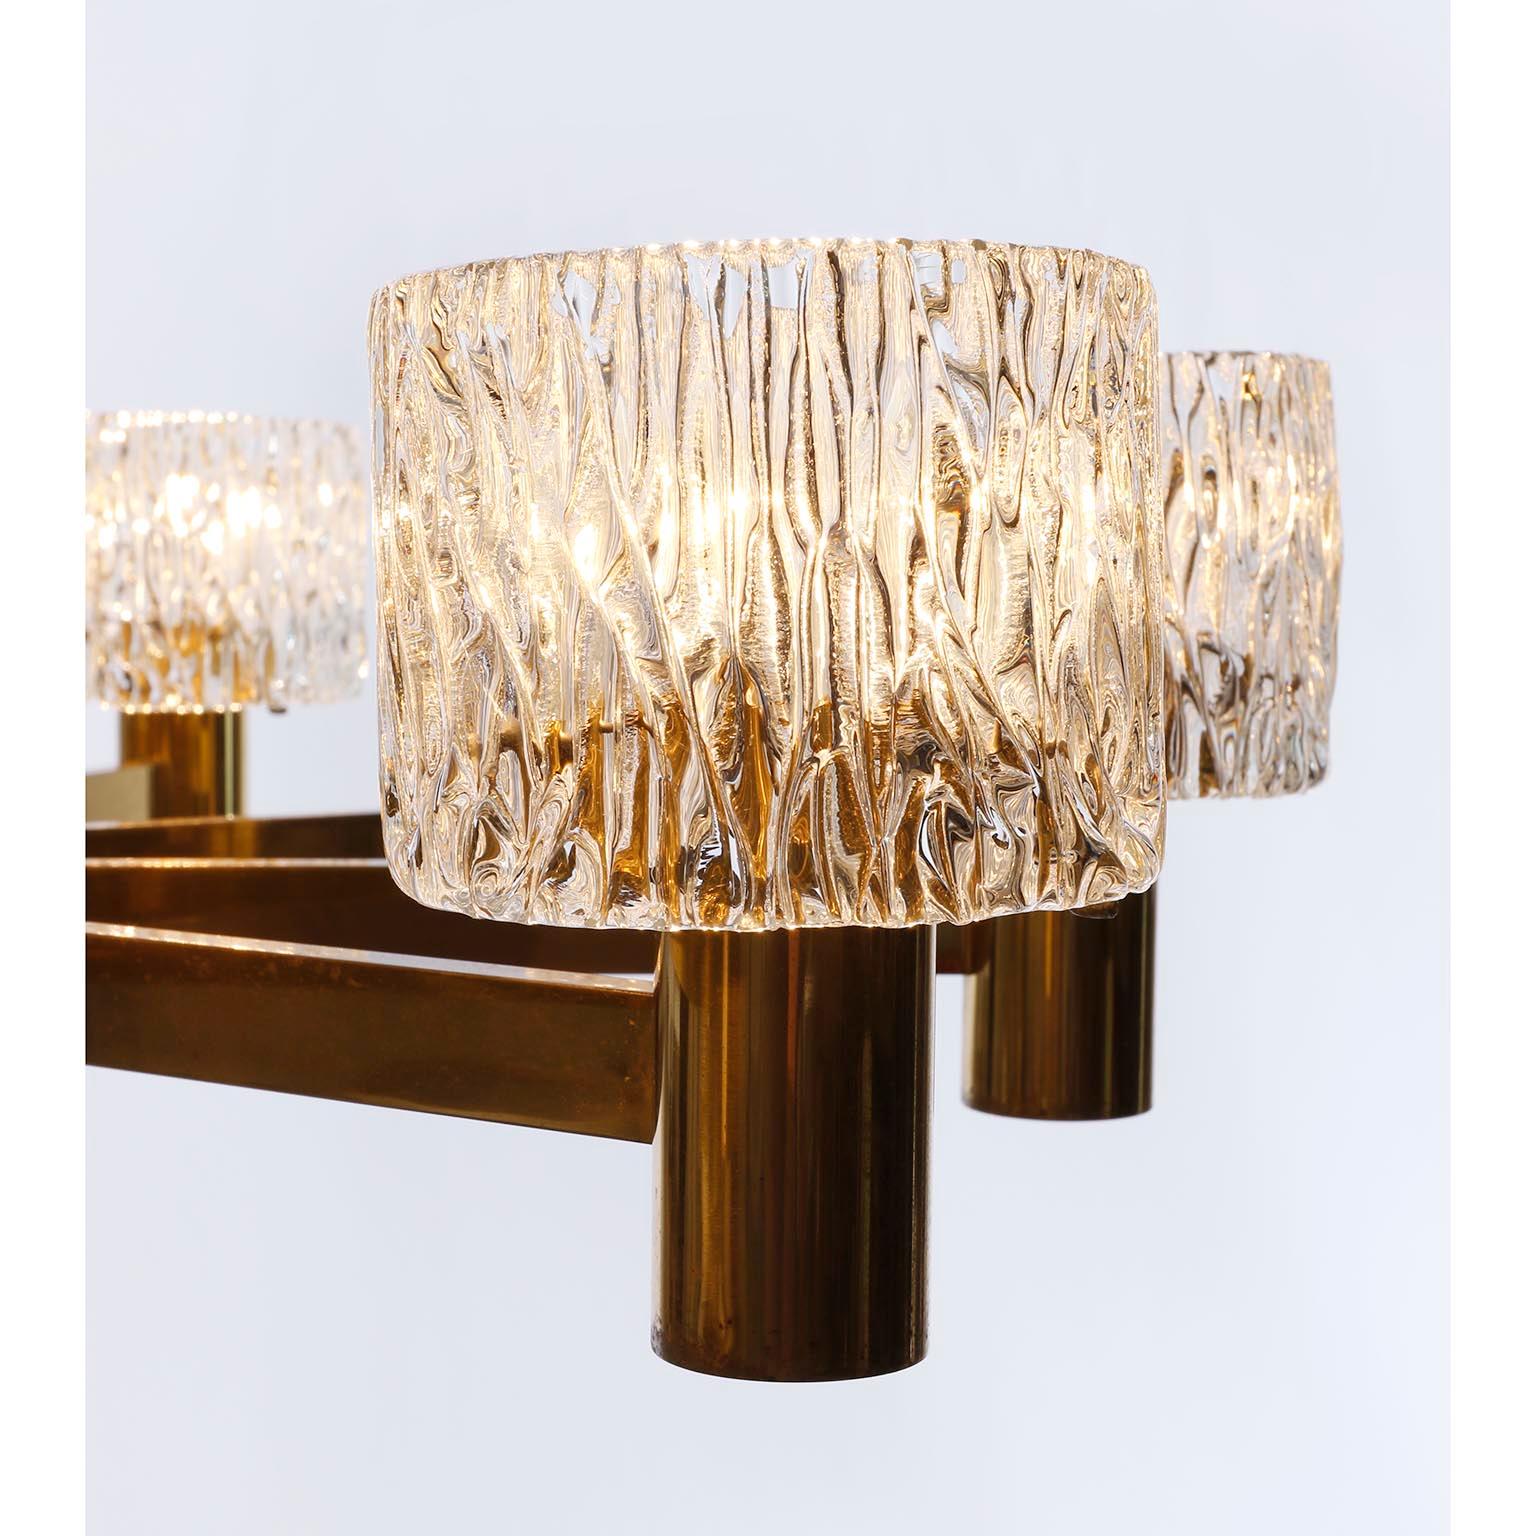 Large 10-Arm Chandelier by J.T. Kalmar, Brass and Textured Pressed Glass, 1960s For Sale 4